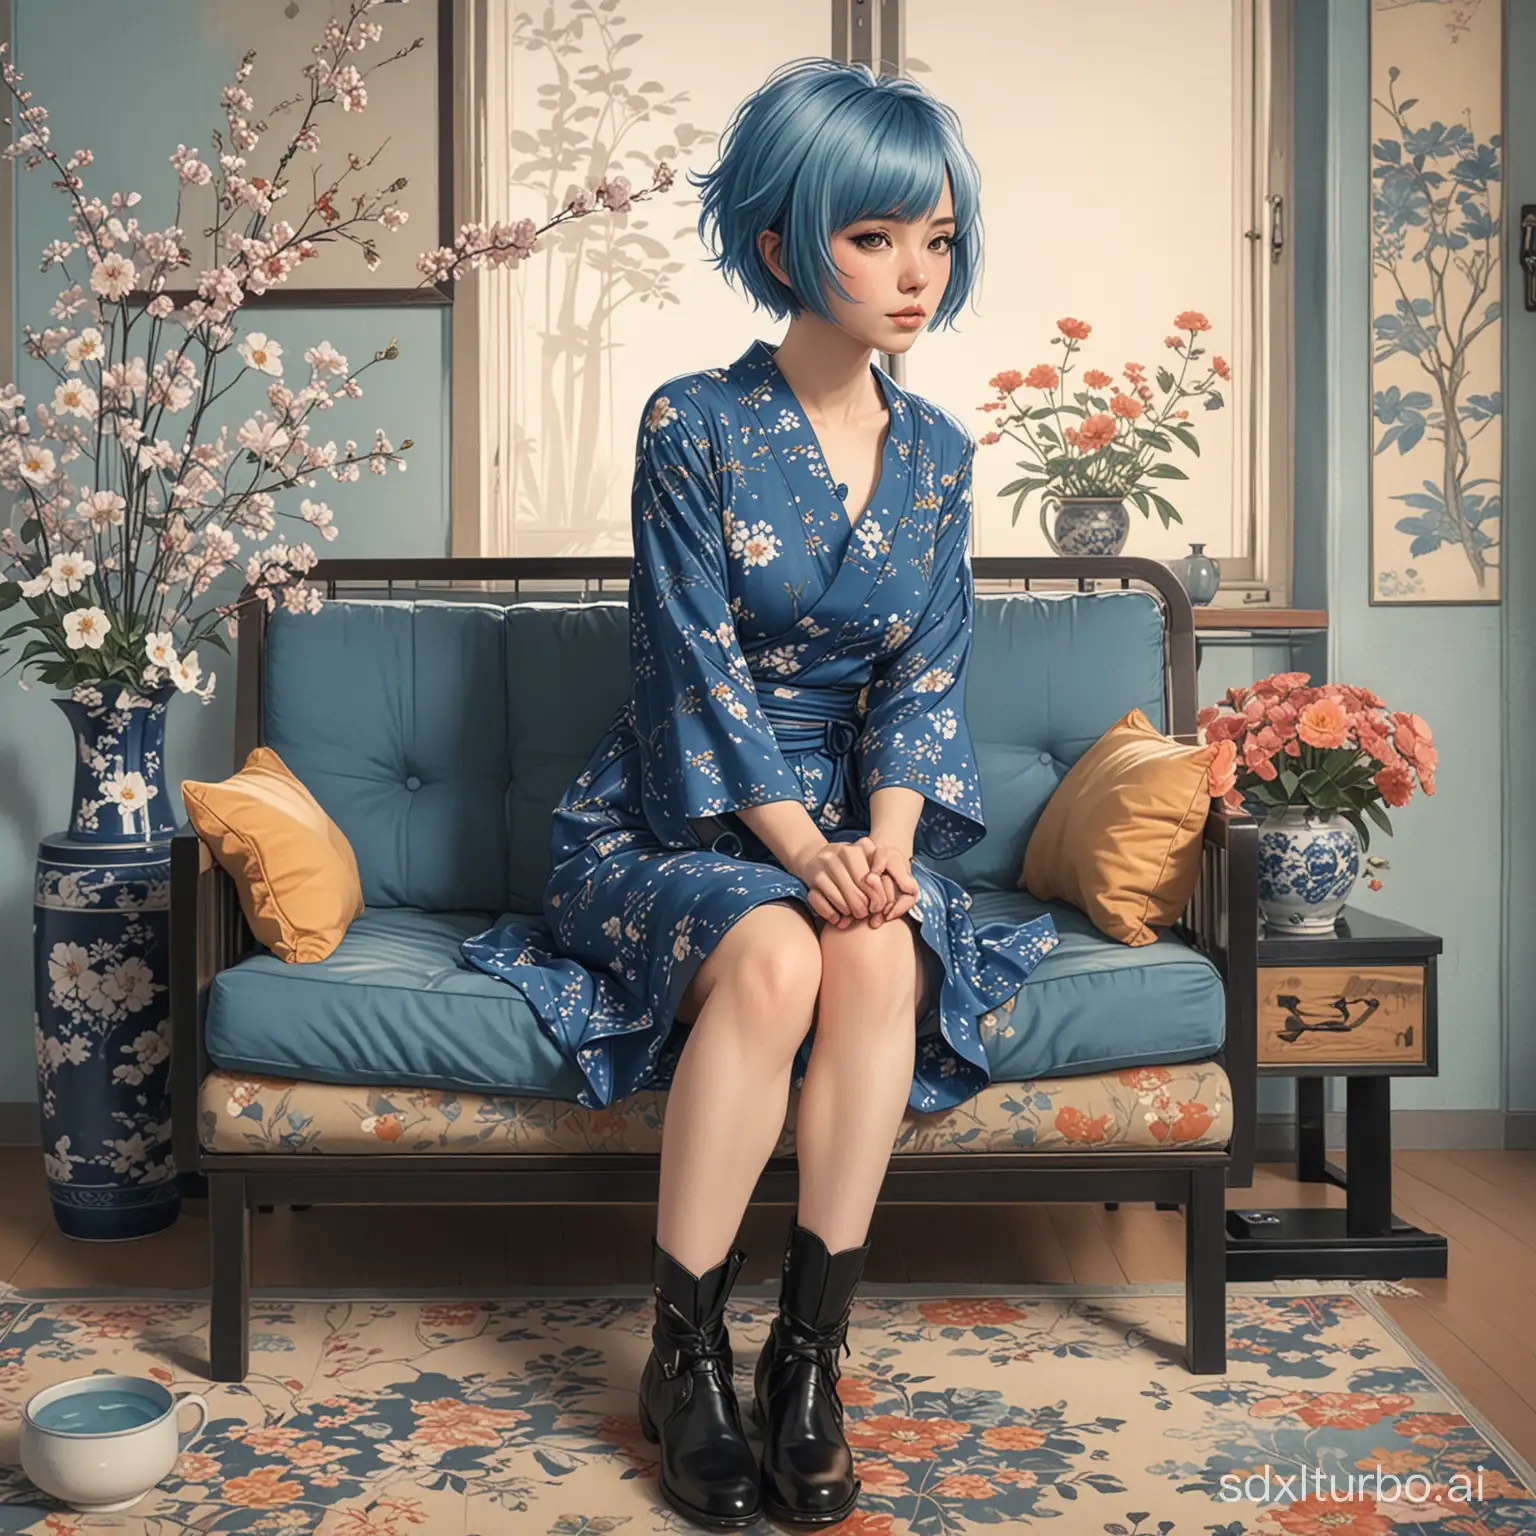 A 2d drawing of a woman  with a short blue bobhair in a japanese livingroom,sat on a sofa holding a cup of coffee while adorned in a blue dress and black boots, the eoom has a low table and vase of flowers, in the style of anime